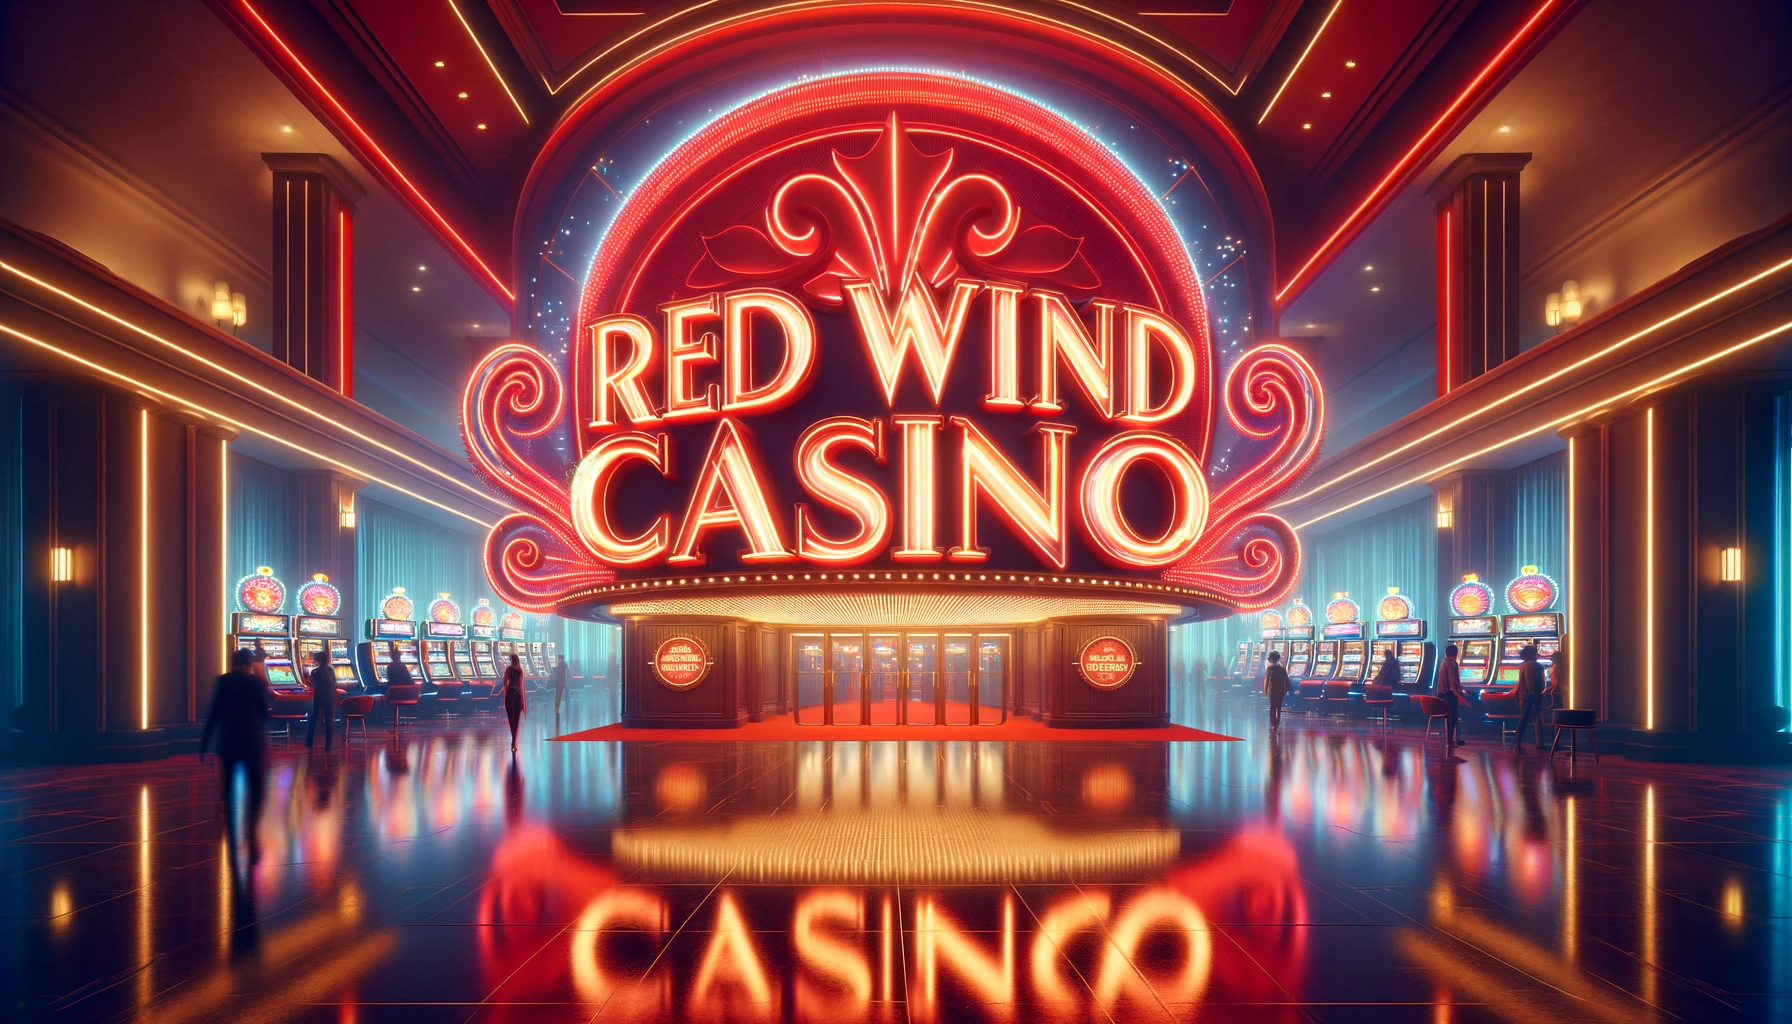 Red Wind Casino: Your #1 Gateway to Endless Fun and Wins